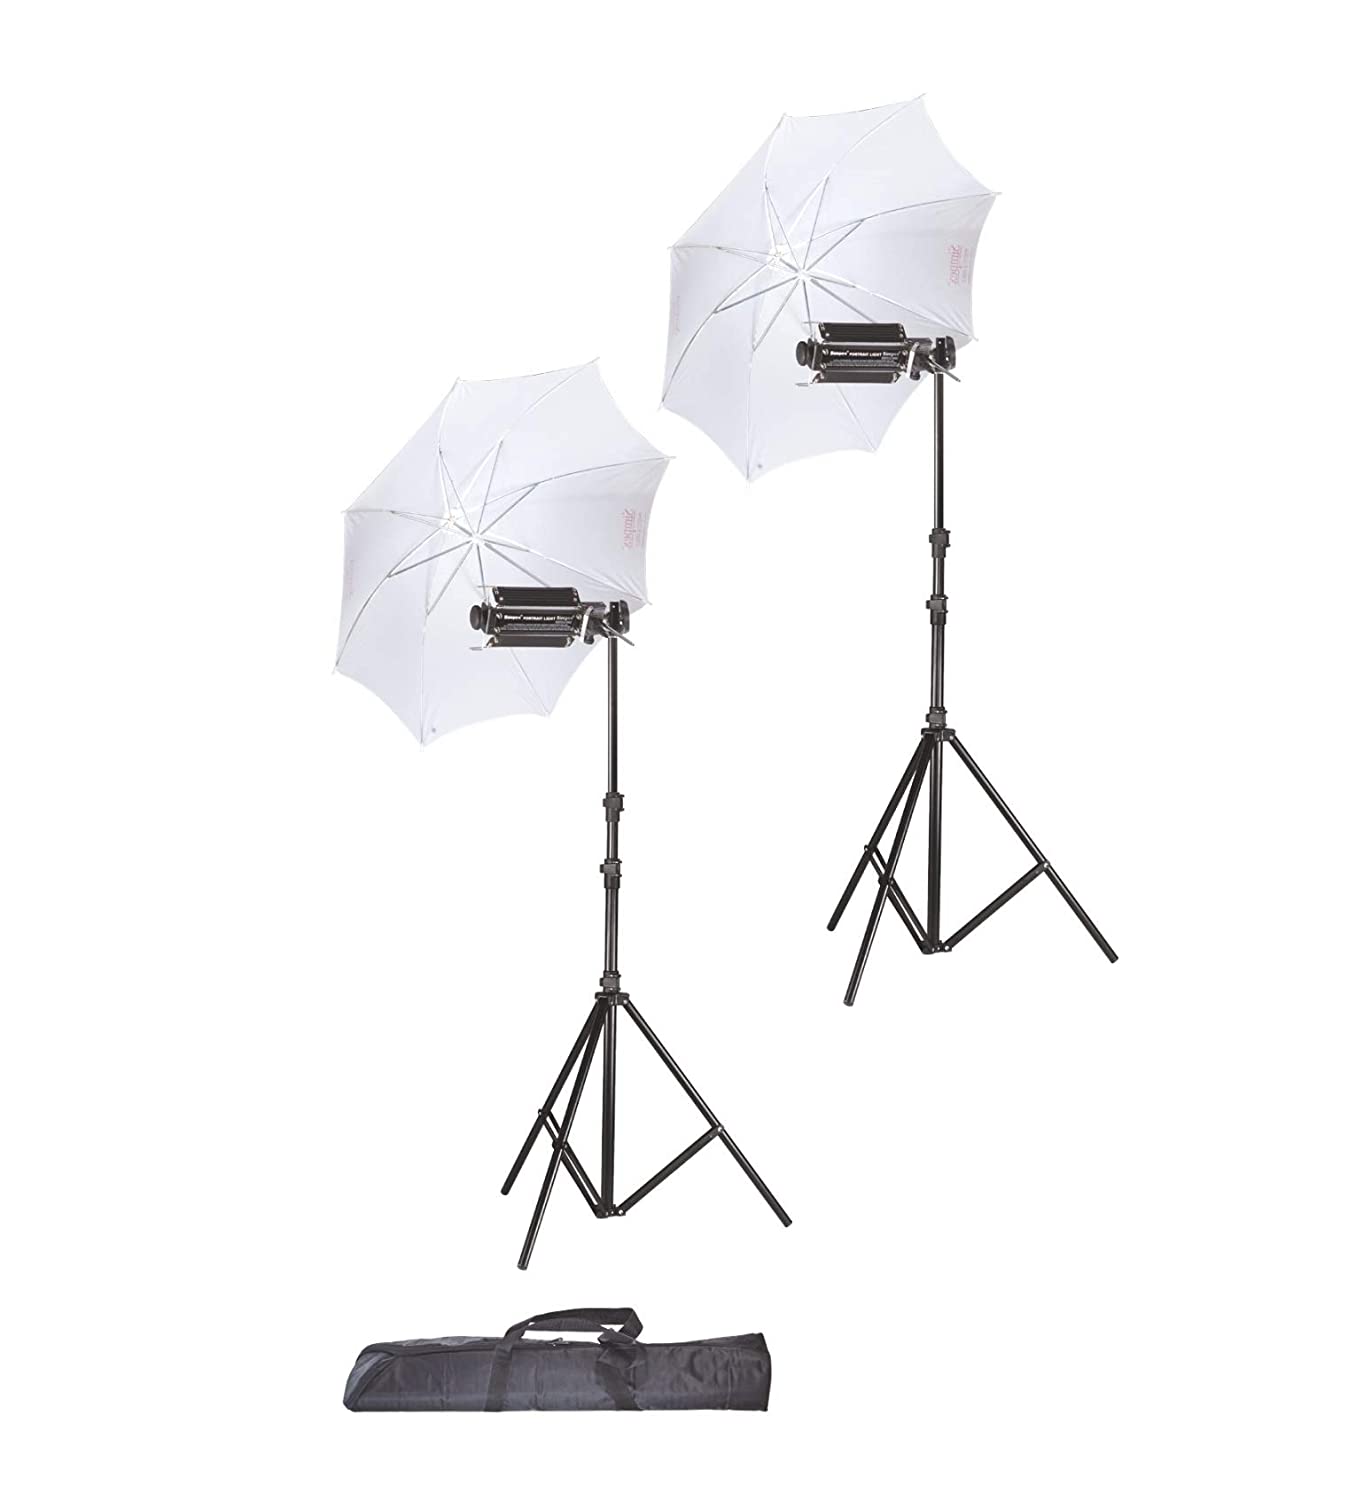 Simpex Porta Kit with a Pair of Light Stand 9 Feet and Umbrella for Video and Still Photography 